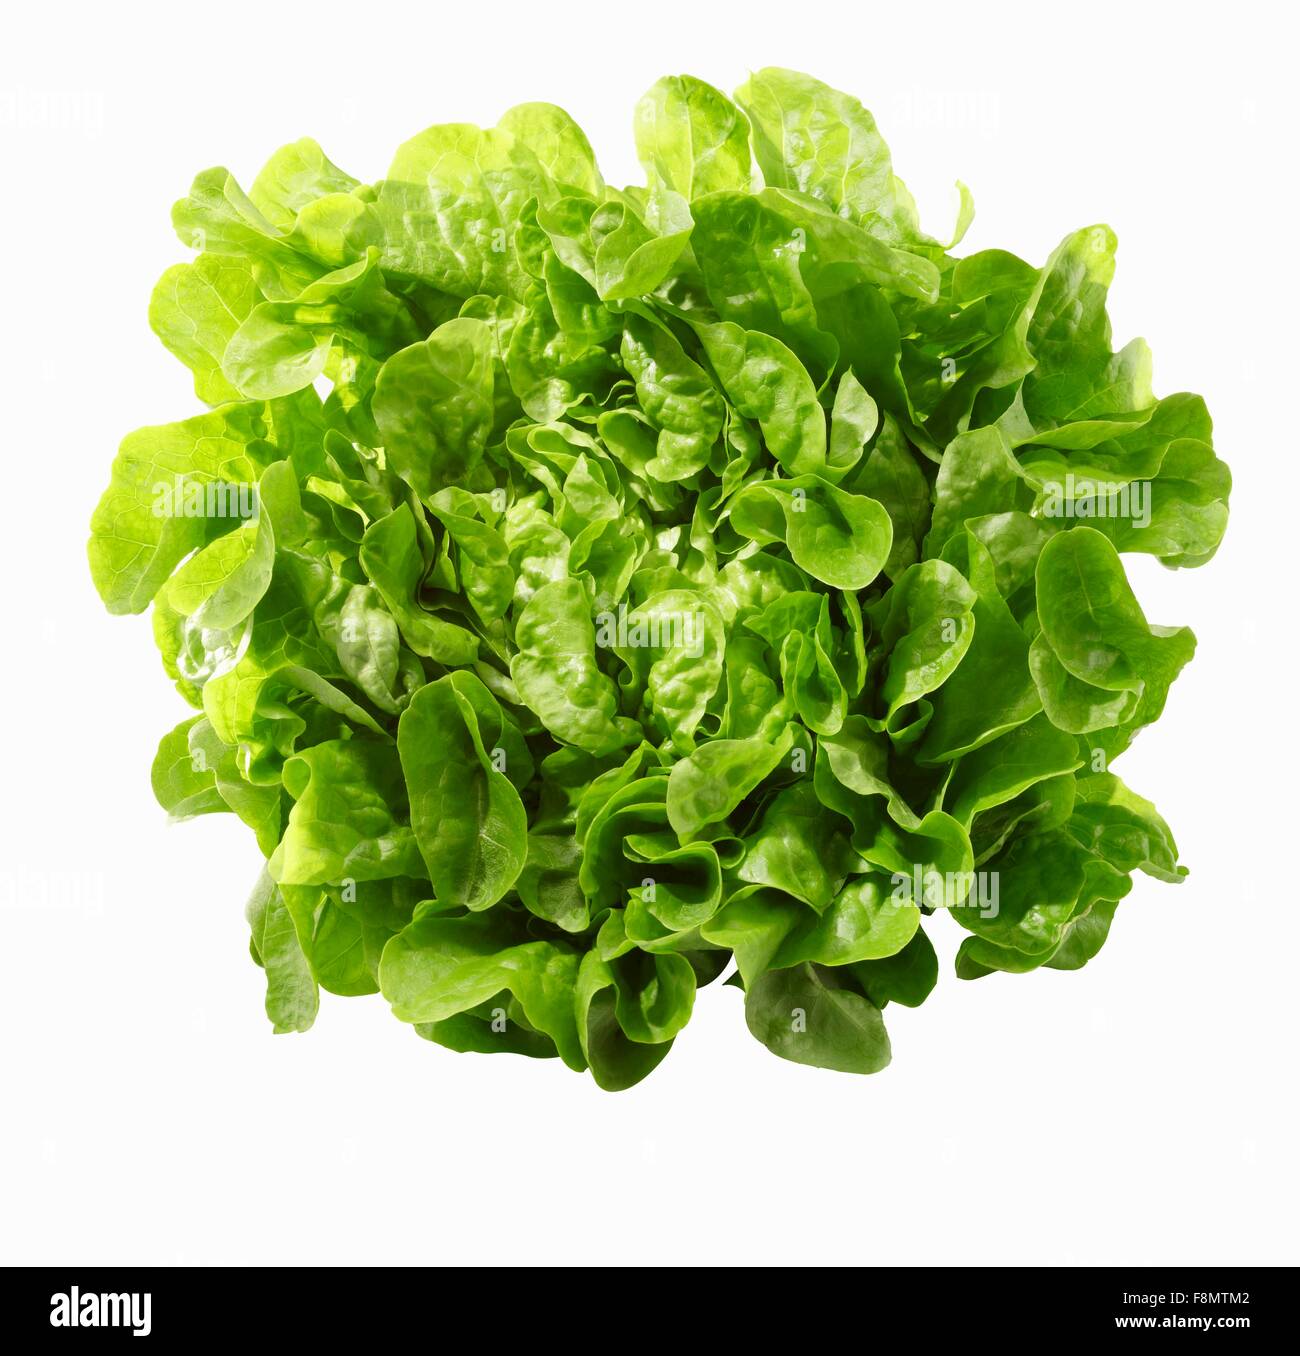 Leafy green lettuce Cut Out Stock Images & Pictures - Alamy